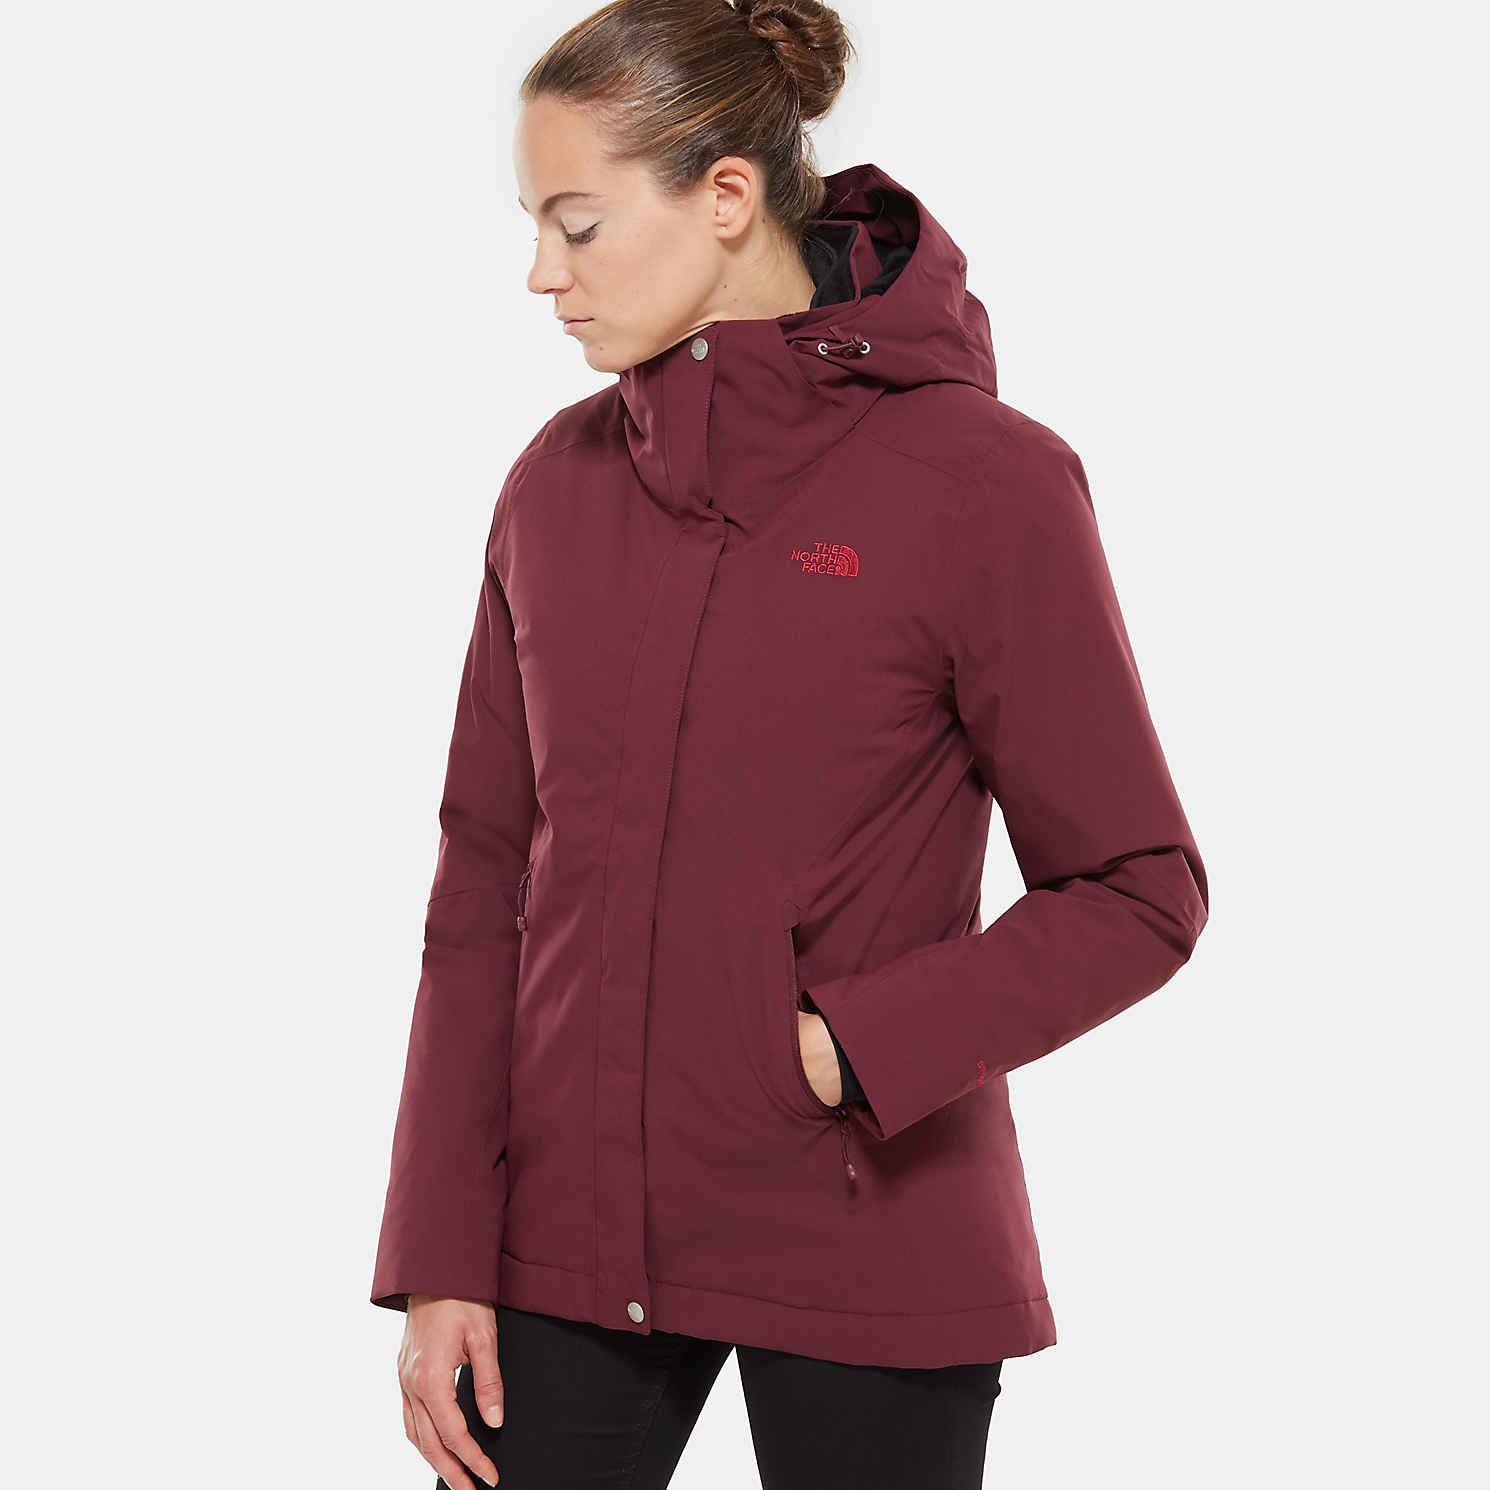 inlux insulated jacket Online shopping 